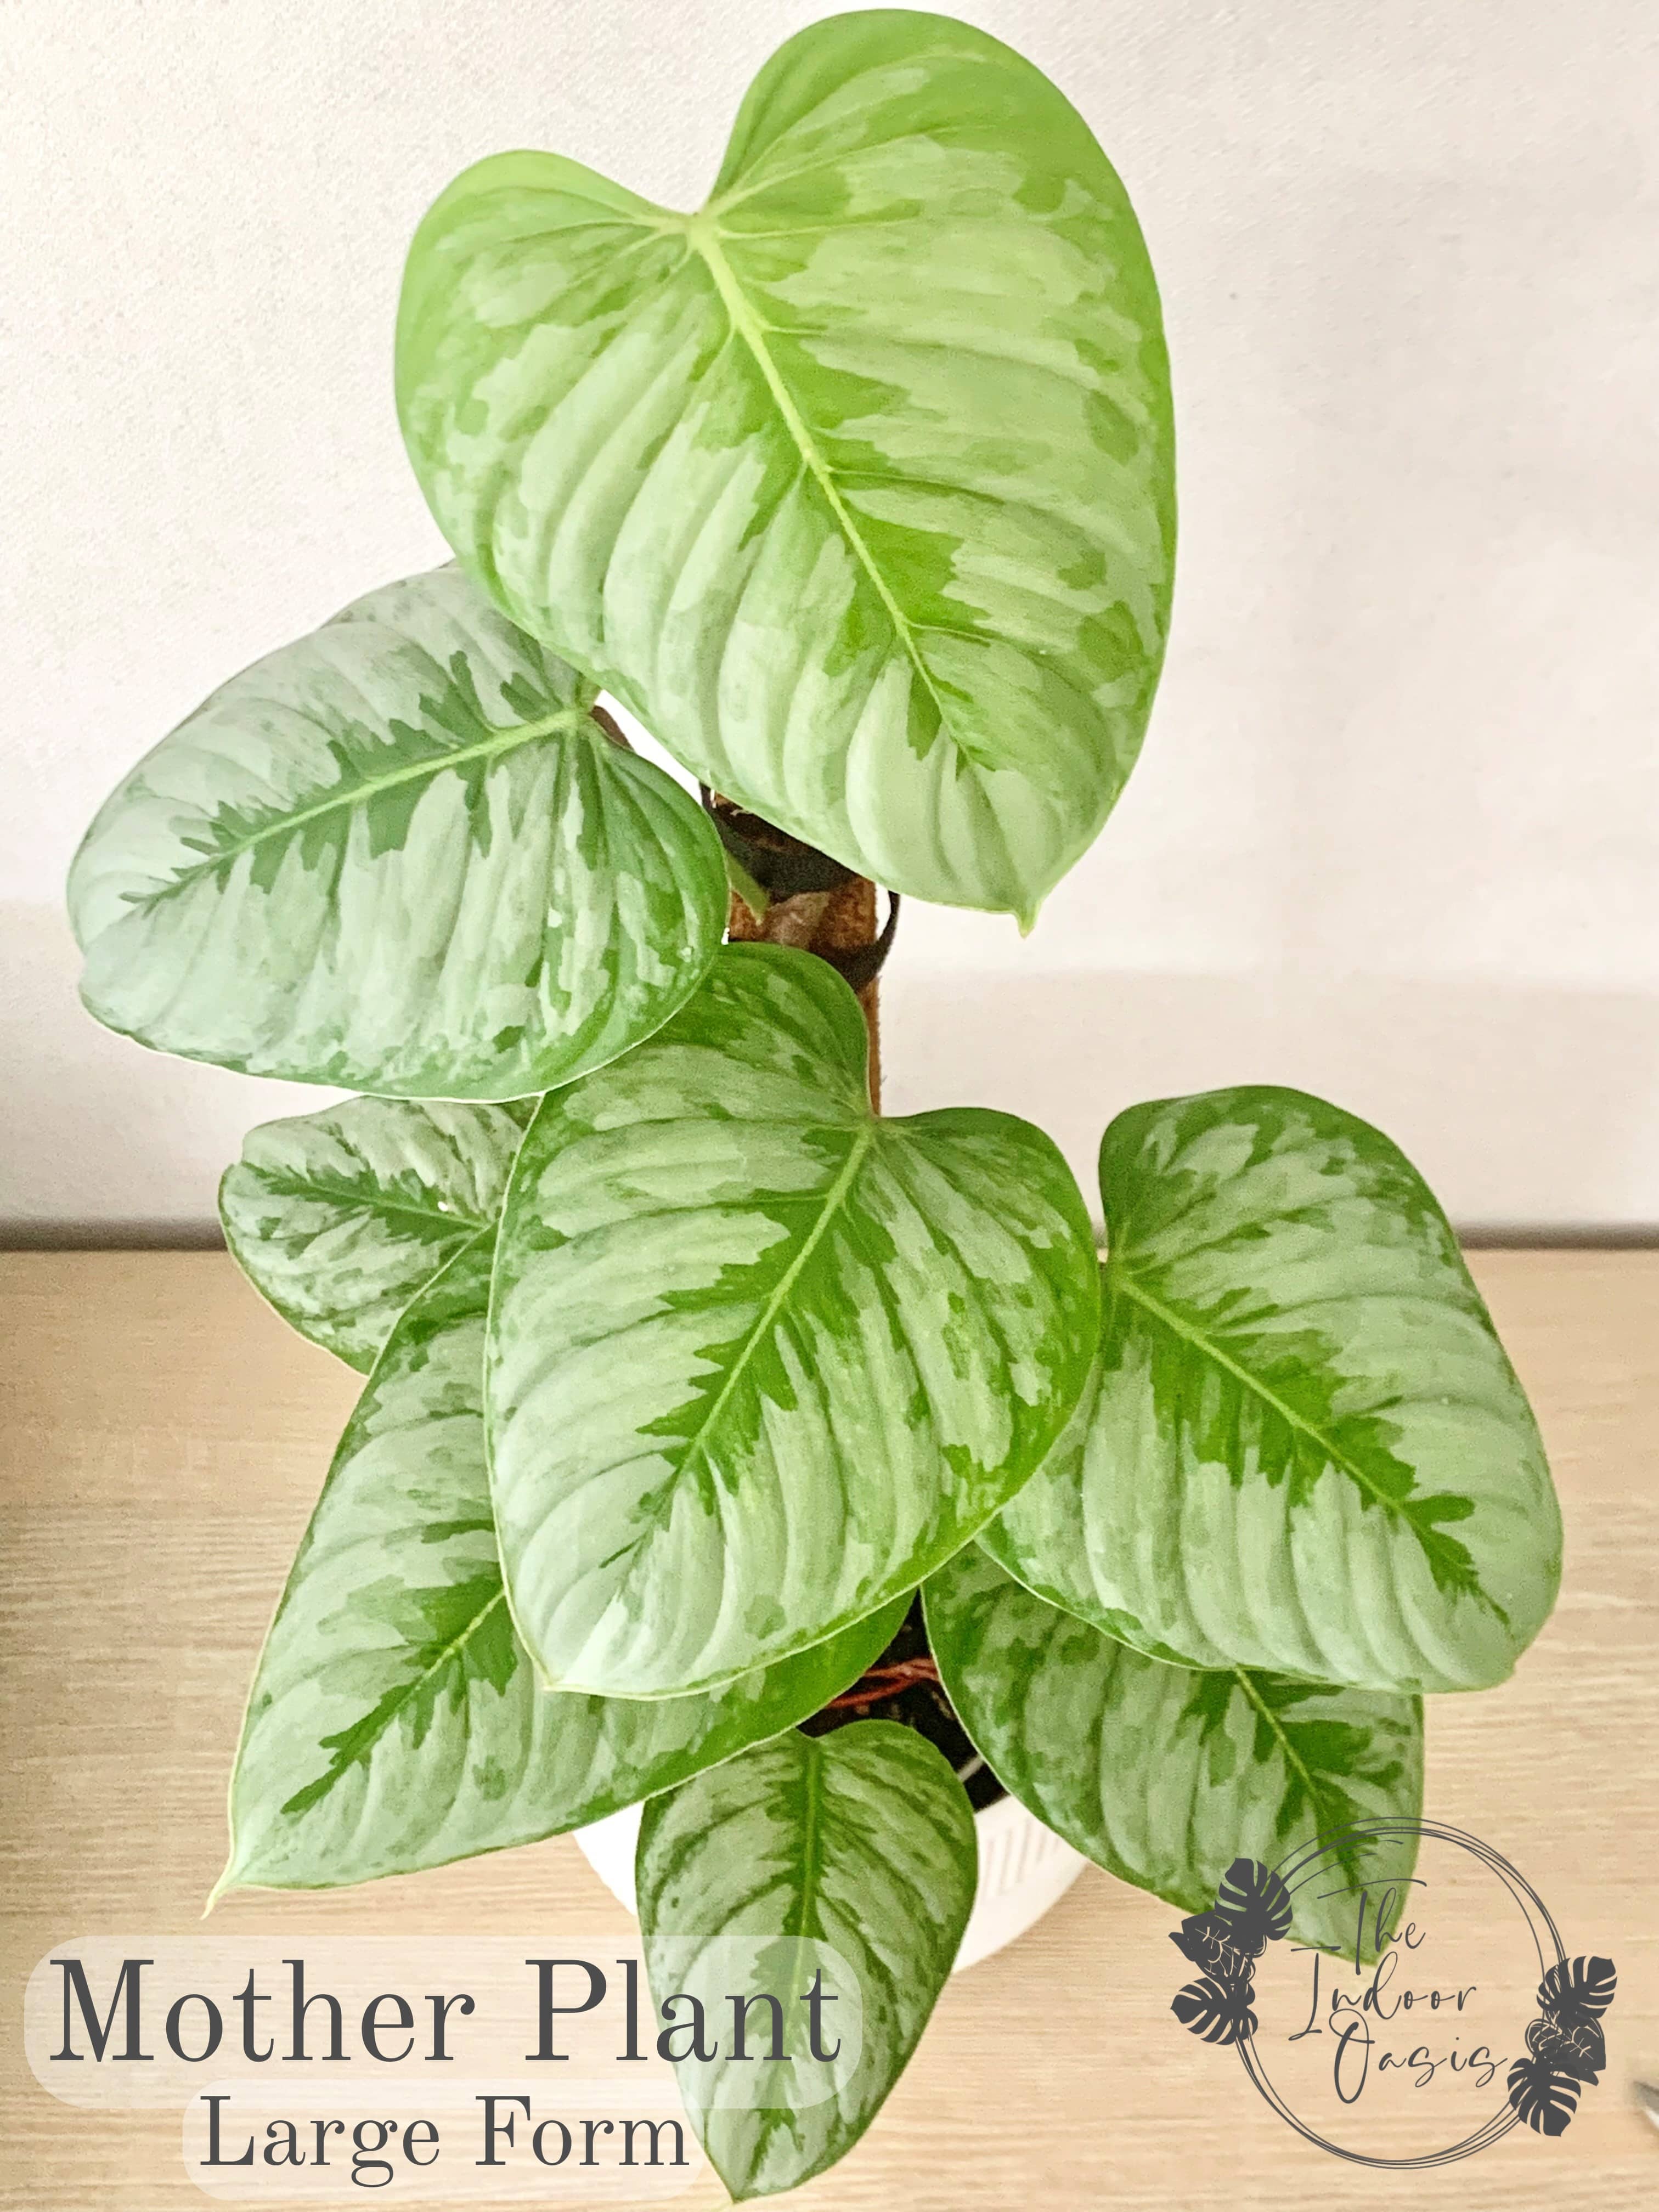 Philodendron Sodiroi Large Form Mother Plant The Indoor Oasis NZ